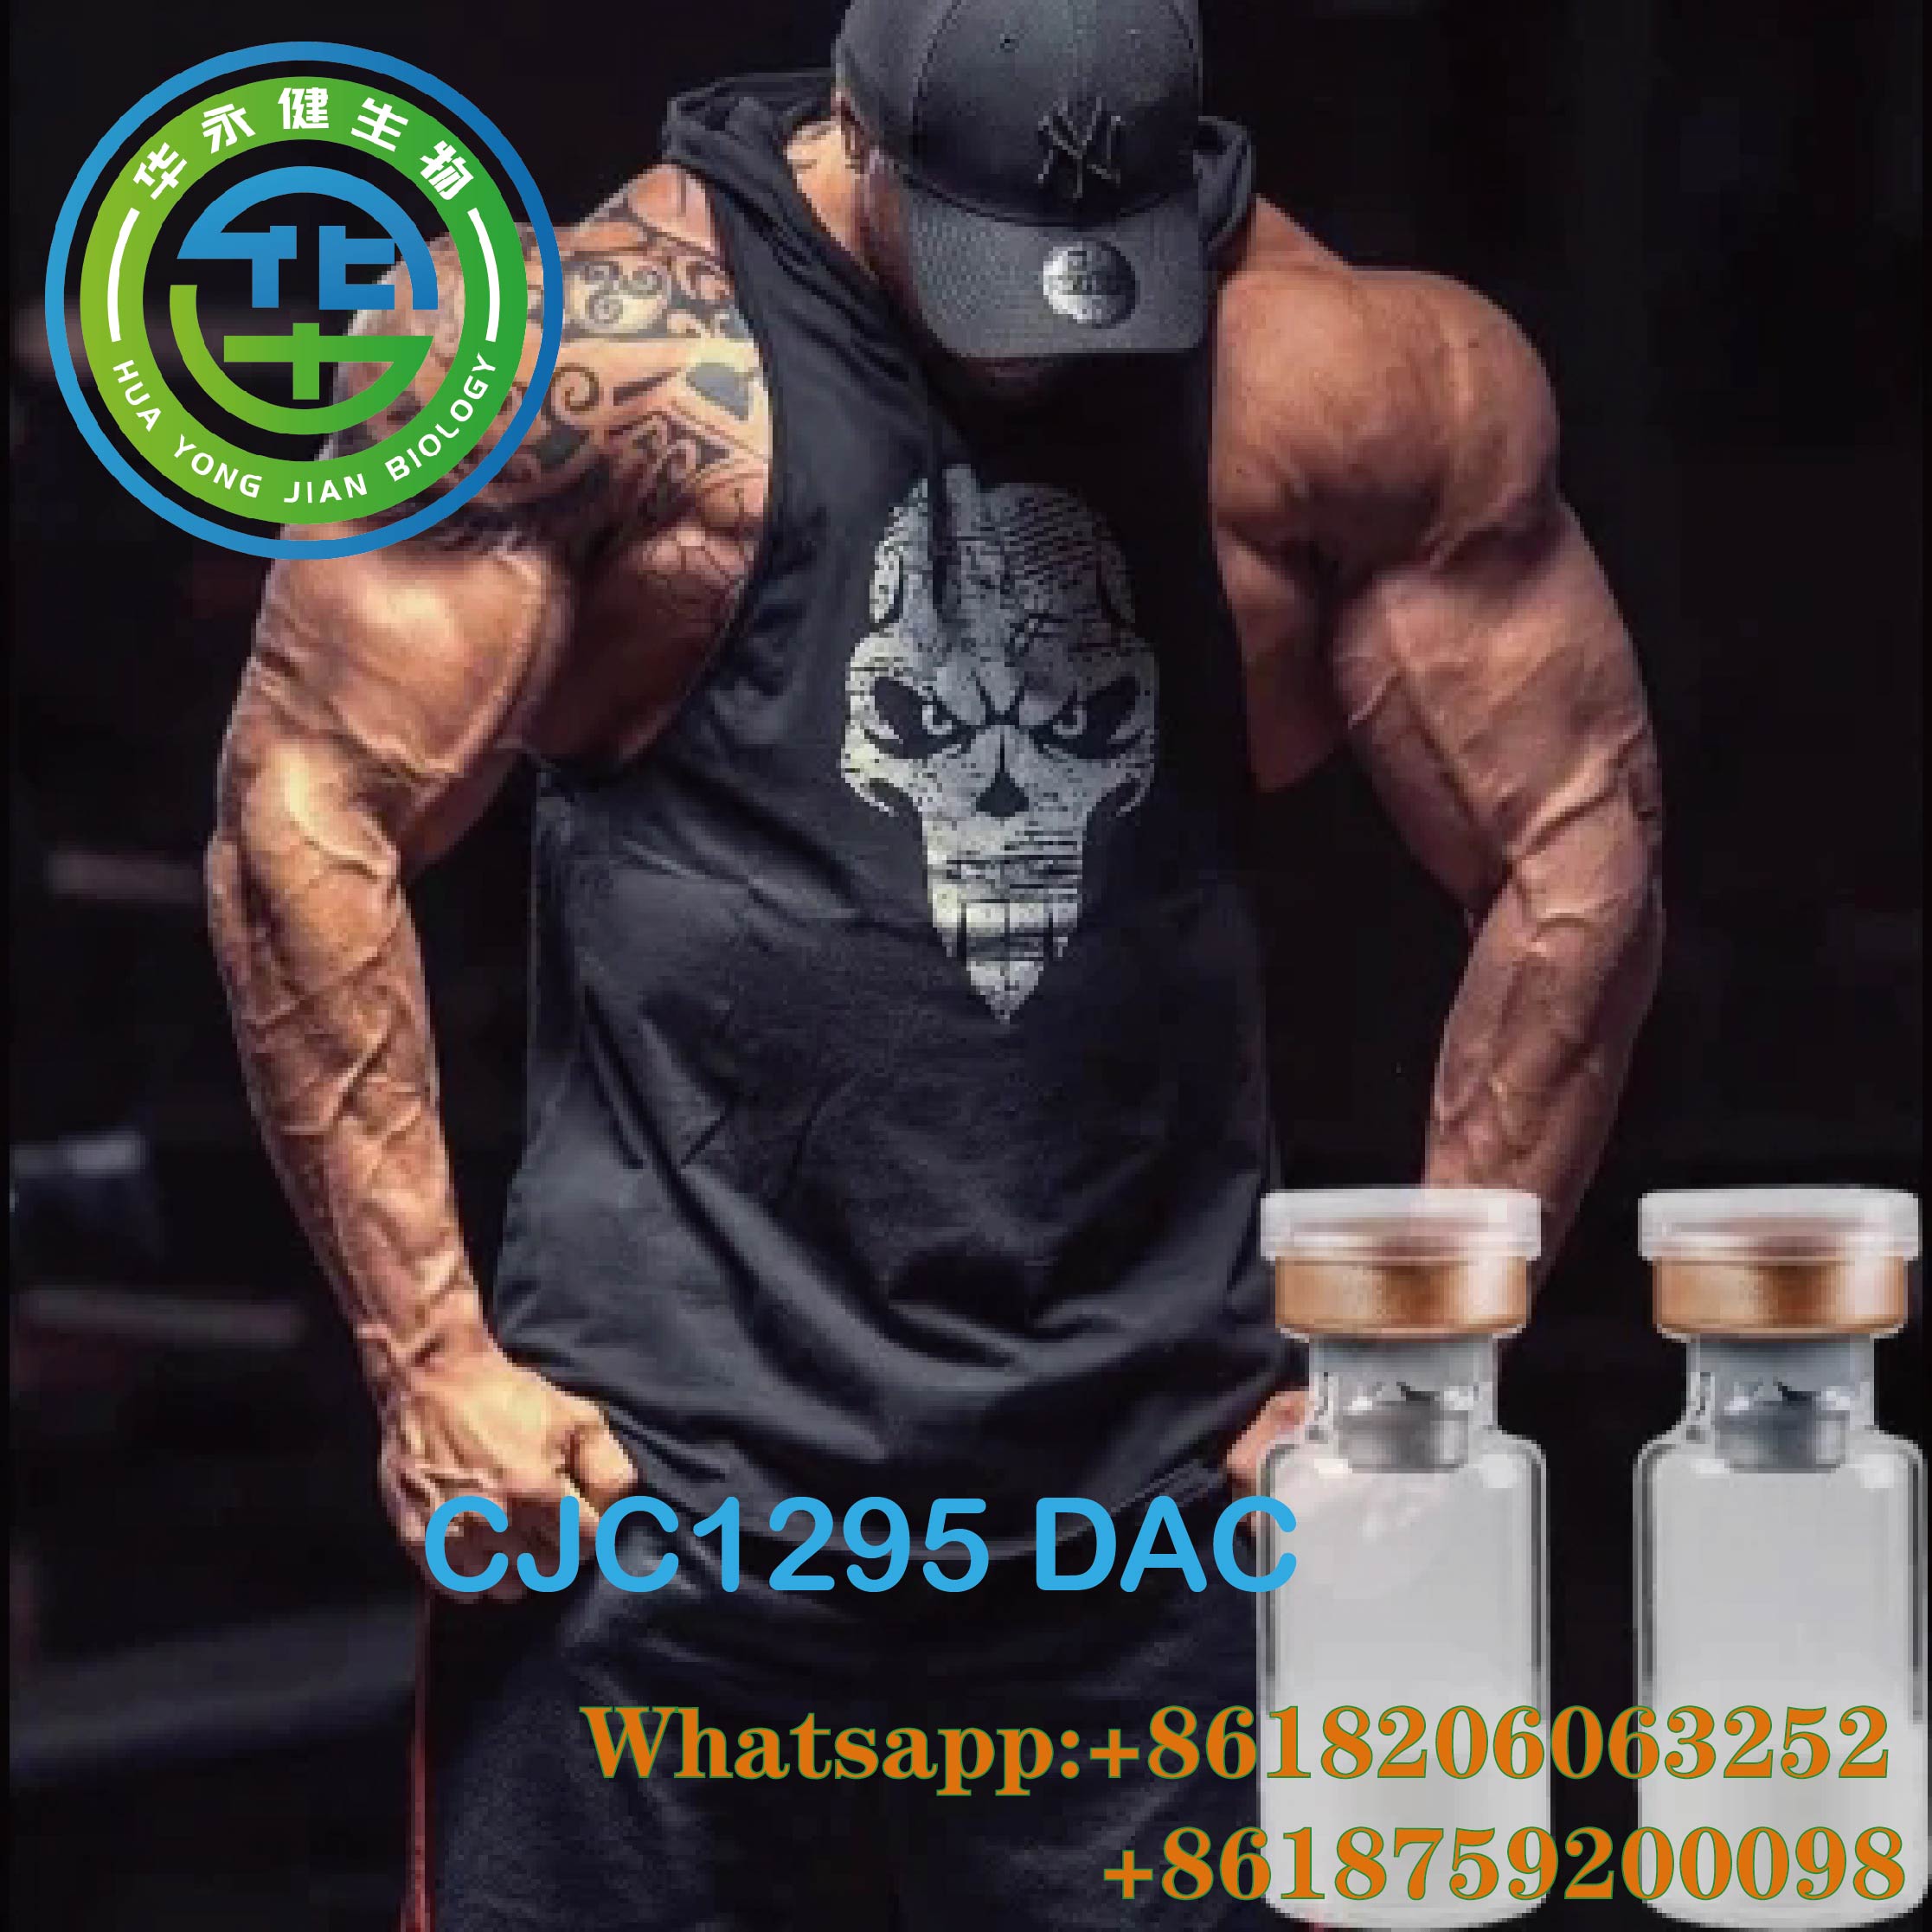 Customized muscle building peptides CJC1295DAC 2mg/Vial Cjc1295 With DAC 